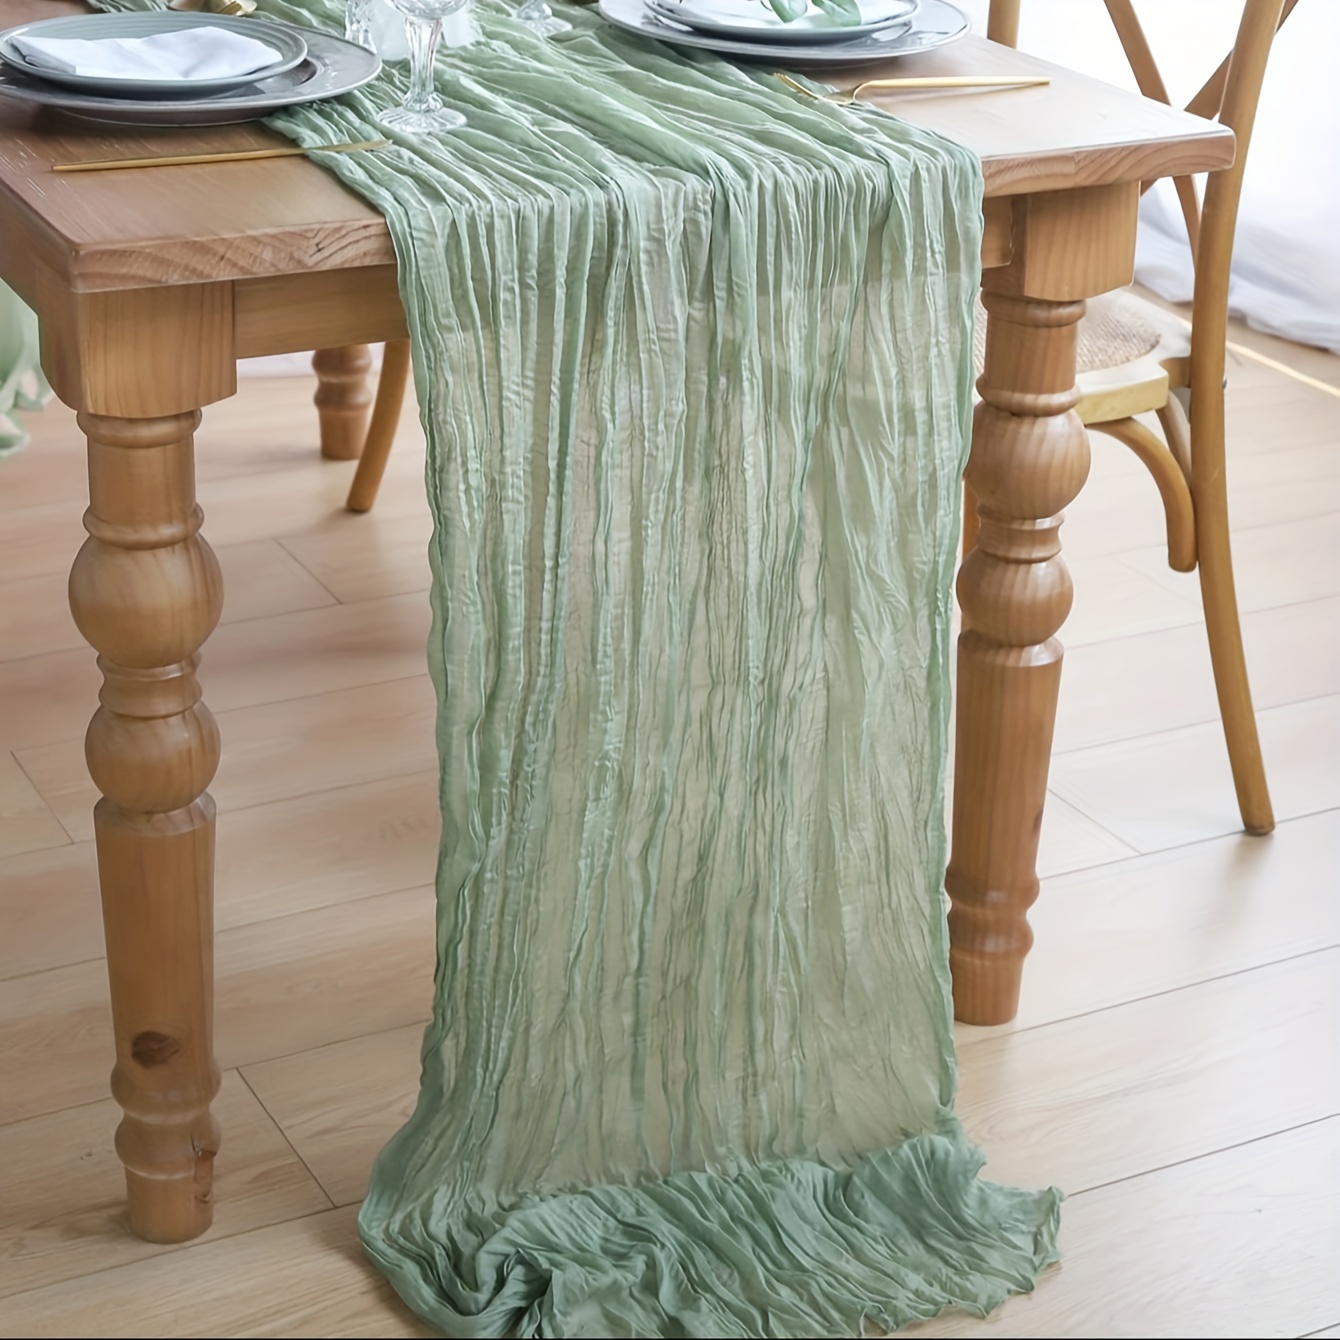 

1/6pcs, Chunky Cotton Cloth Table Runner Green Gauze Boho Style Rustic Sage Green Green Bali Yarn Table Runner, For Baby Shower Decoration Wedding Easter Summer Table Runner